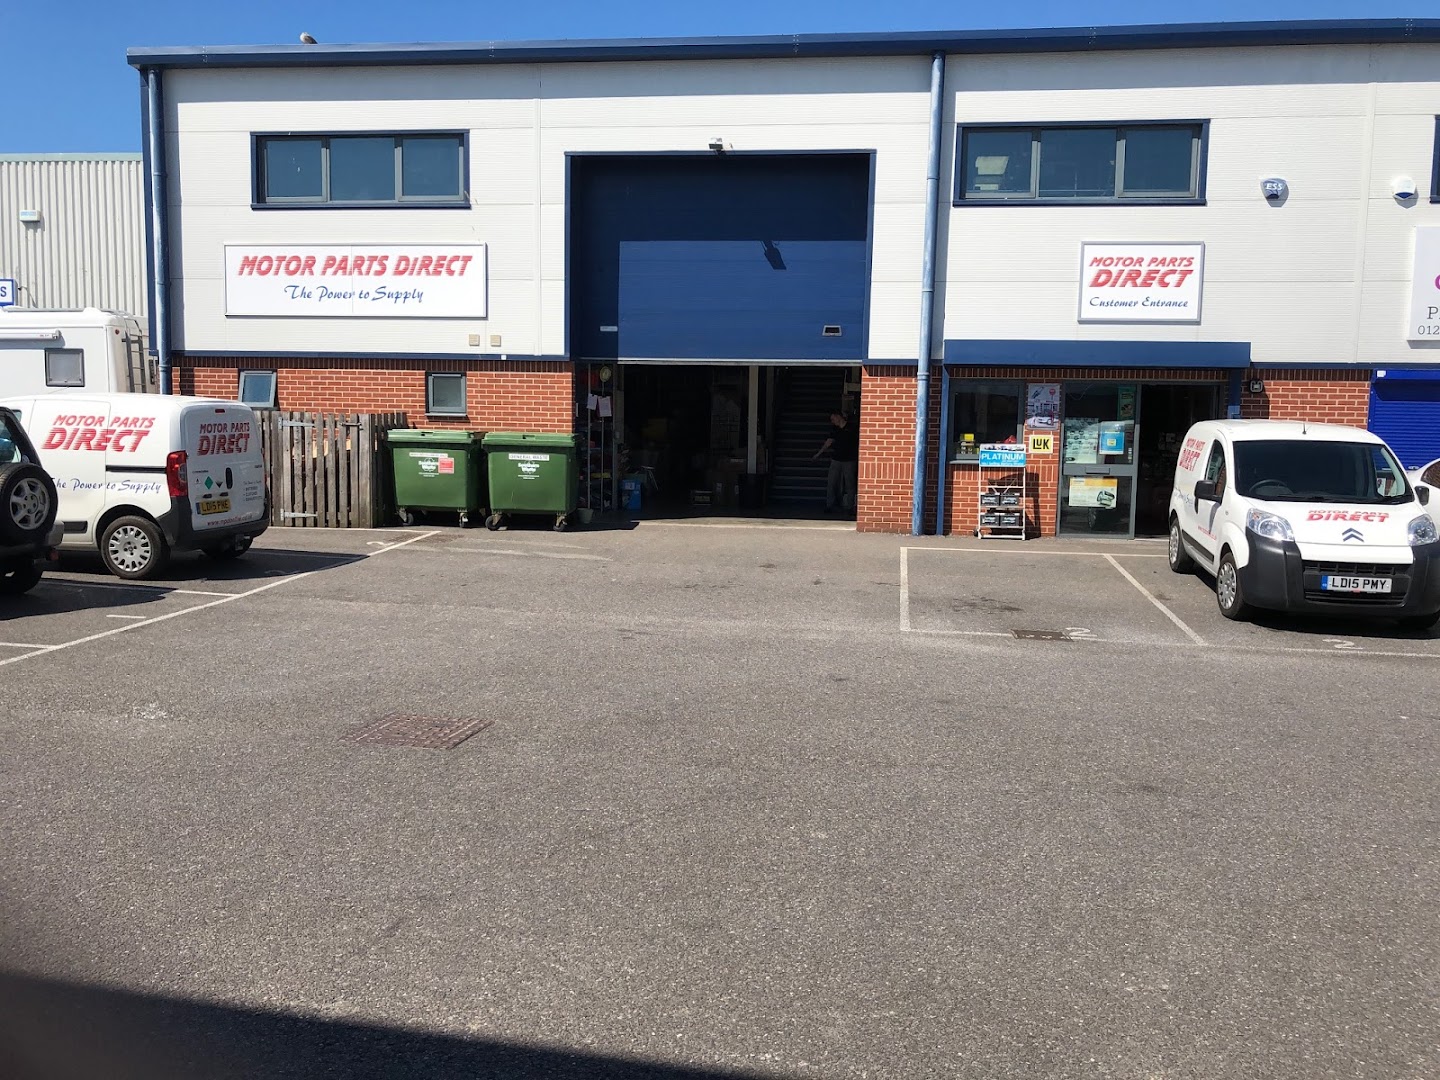 Motor Parts Direct, Poole